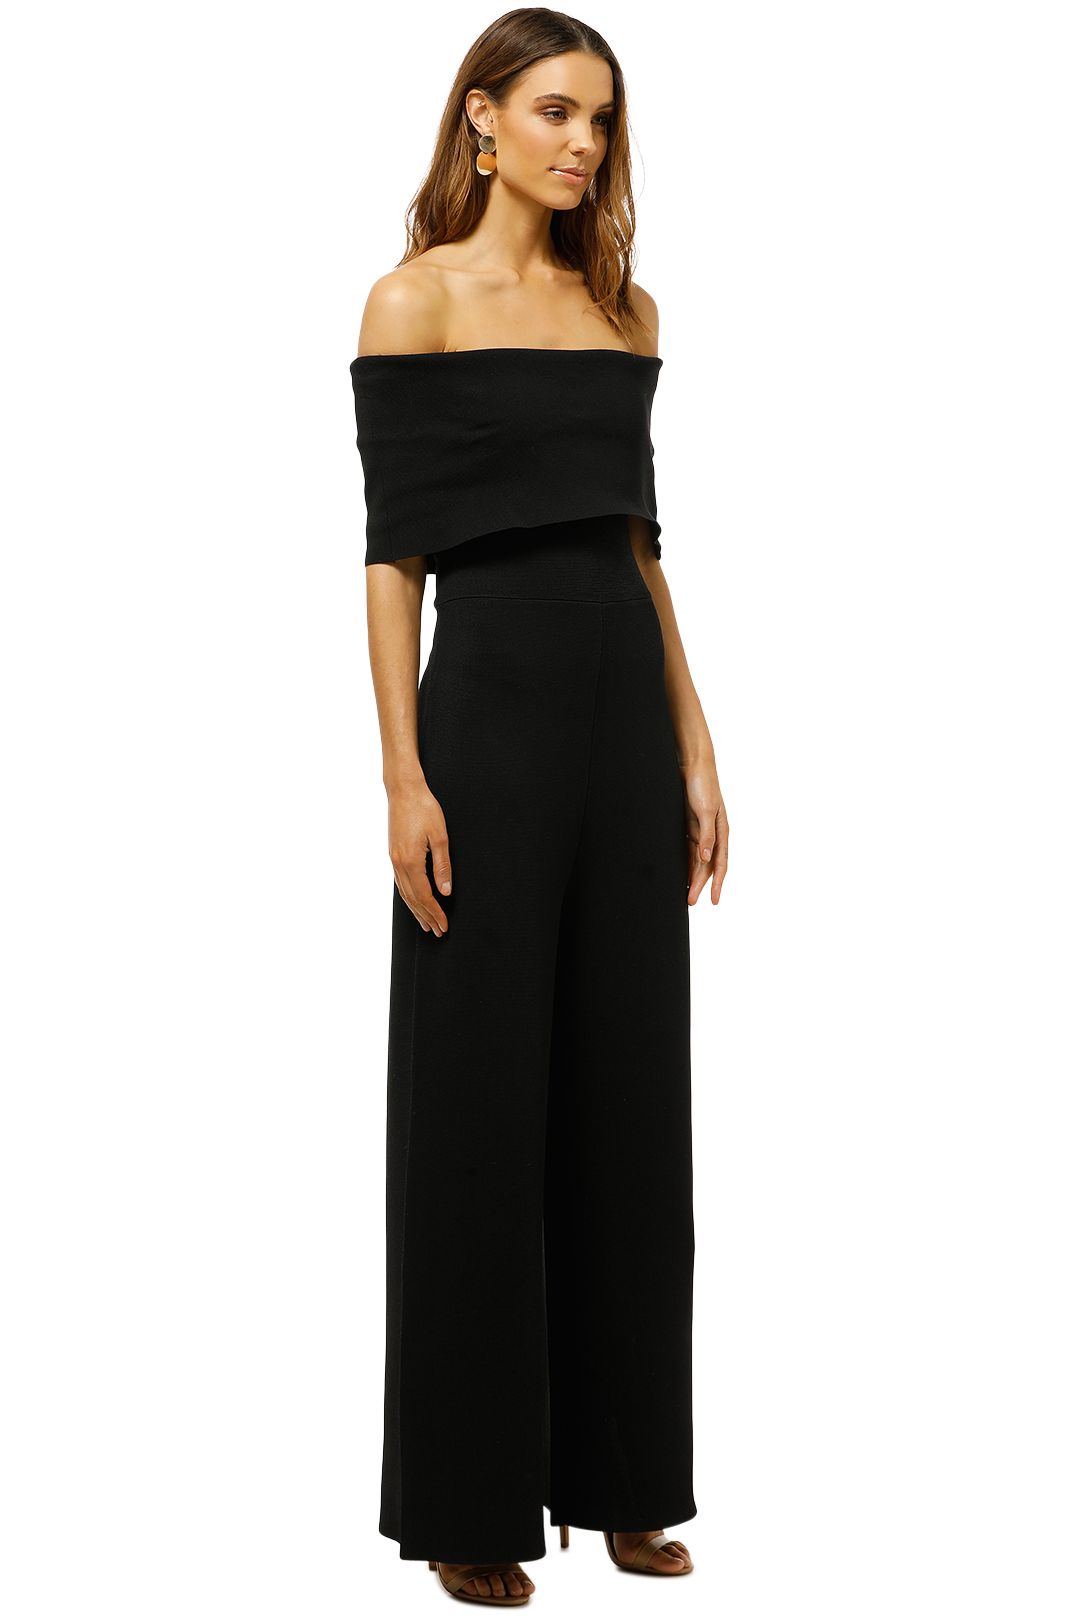 Fold Over Knit Jumpsuit by Witchery for Hire